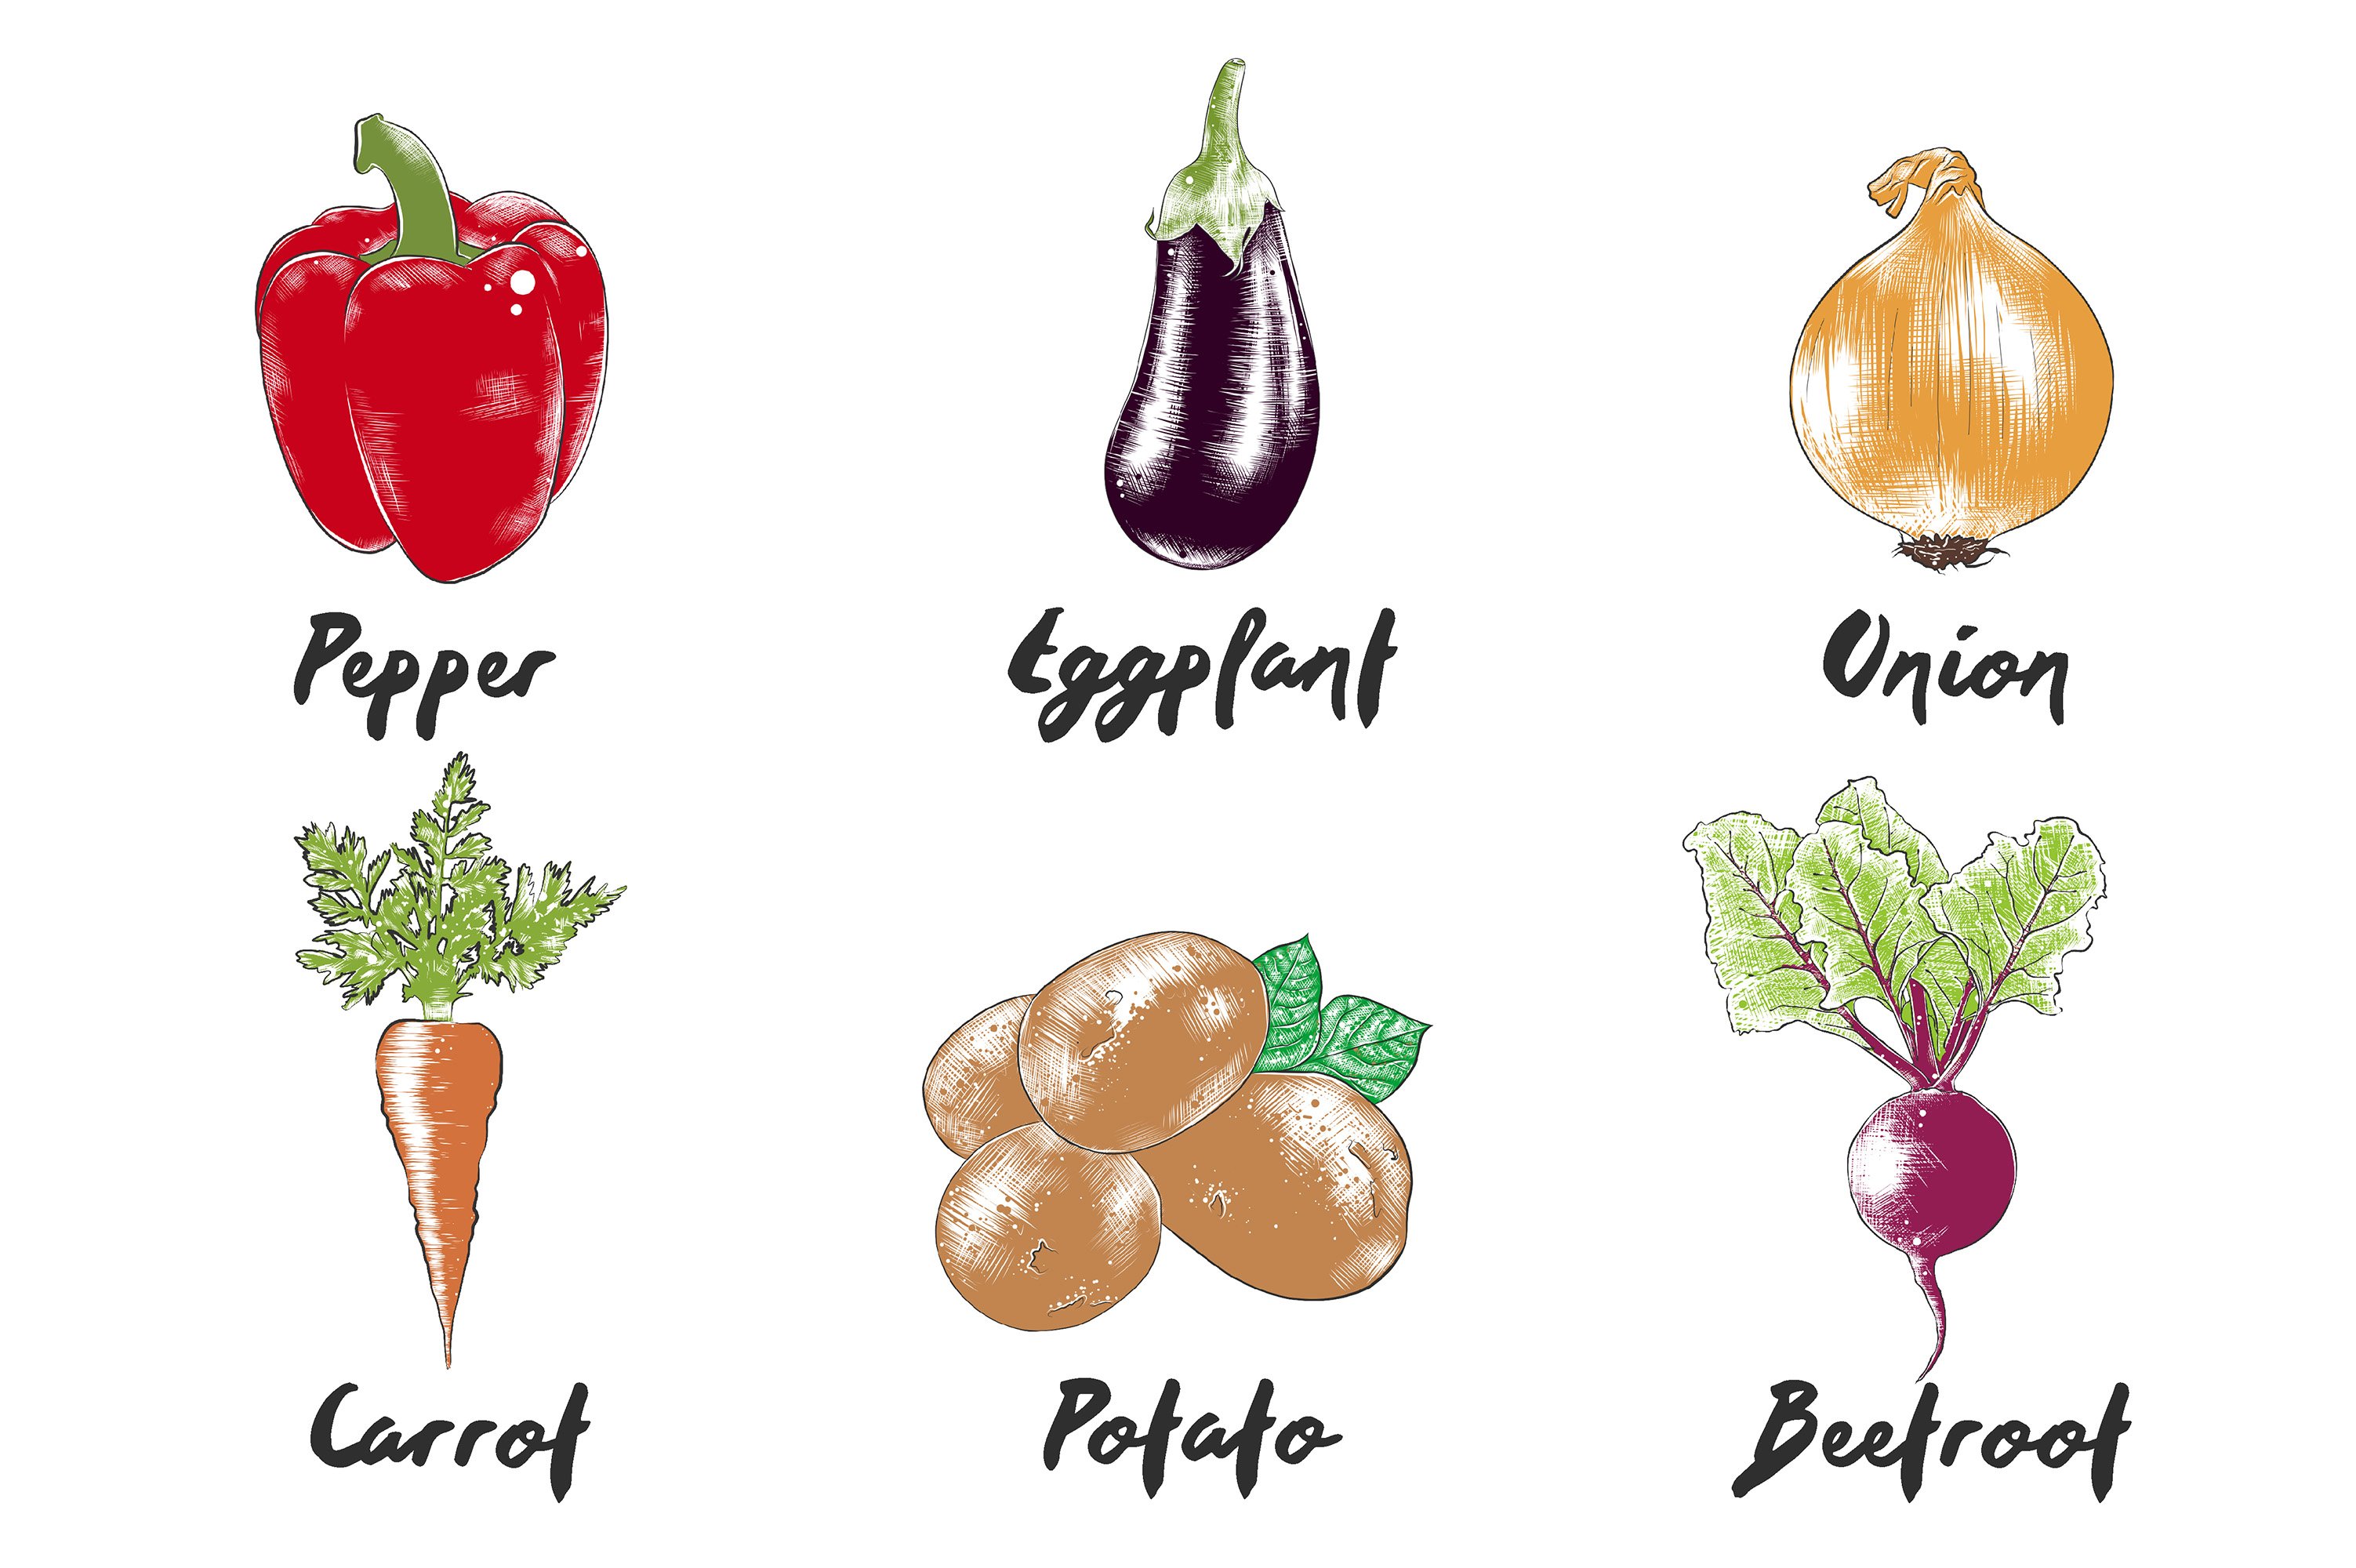 A bunch of vegetables that are labeled in different languages.